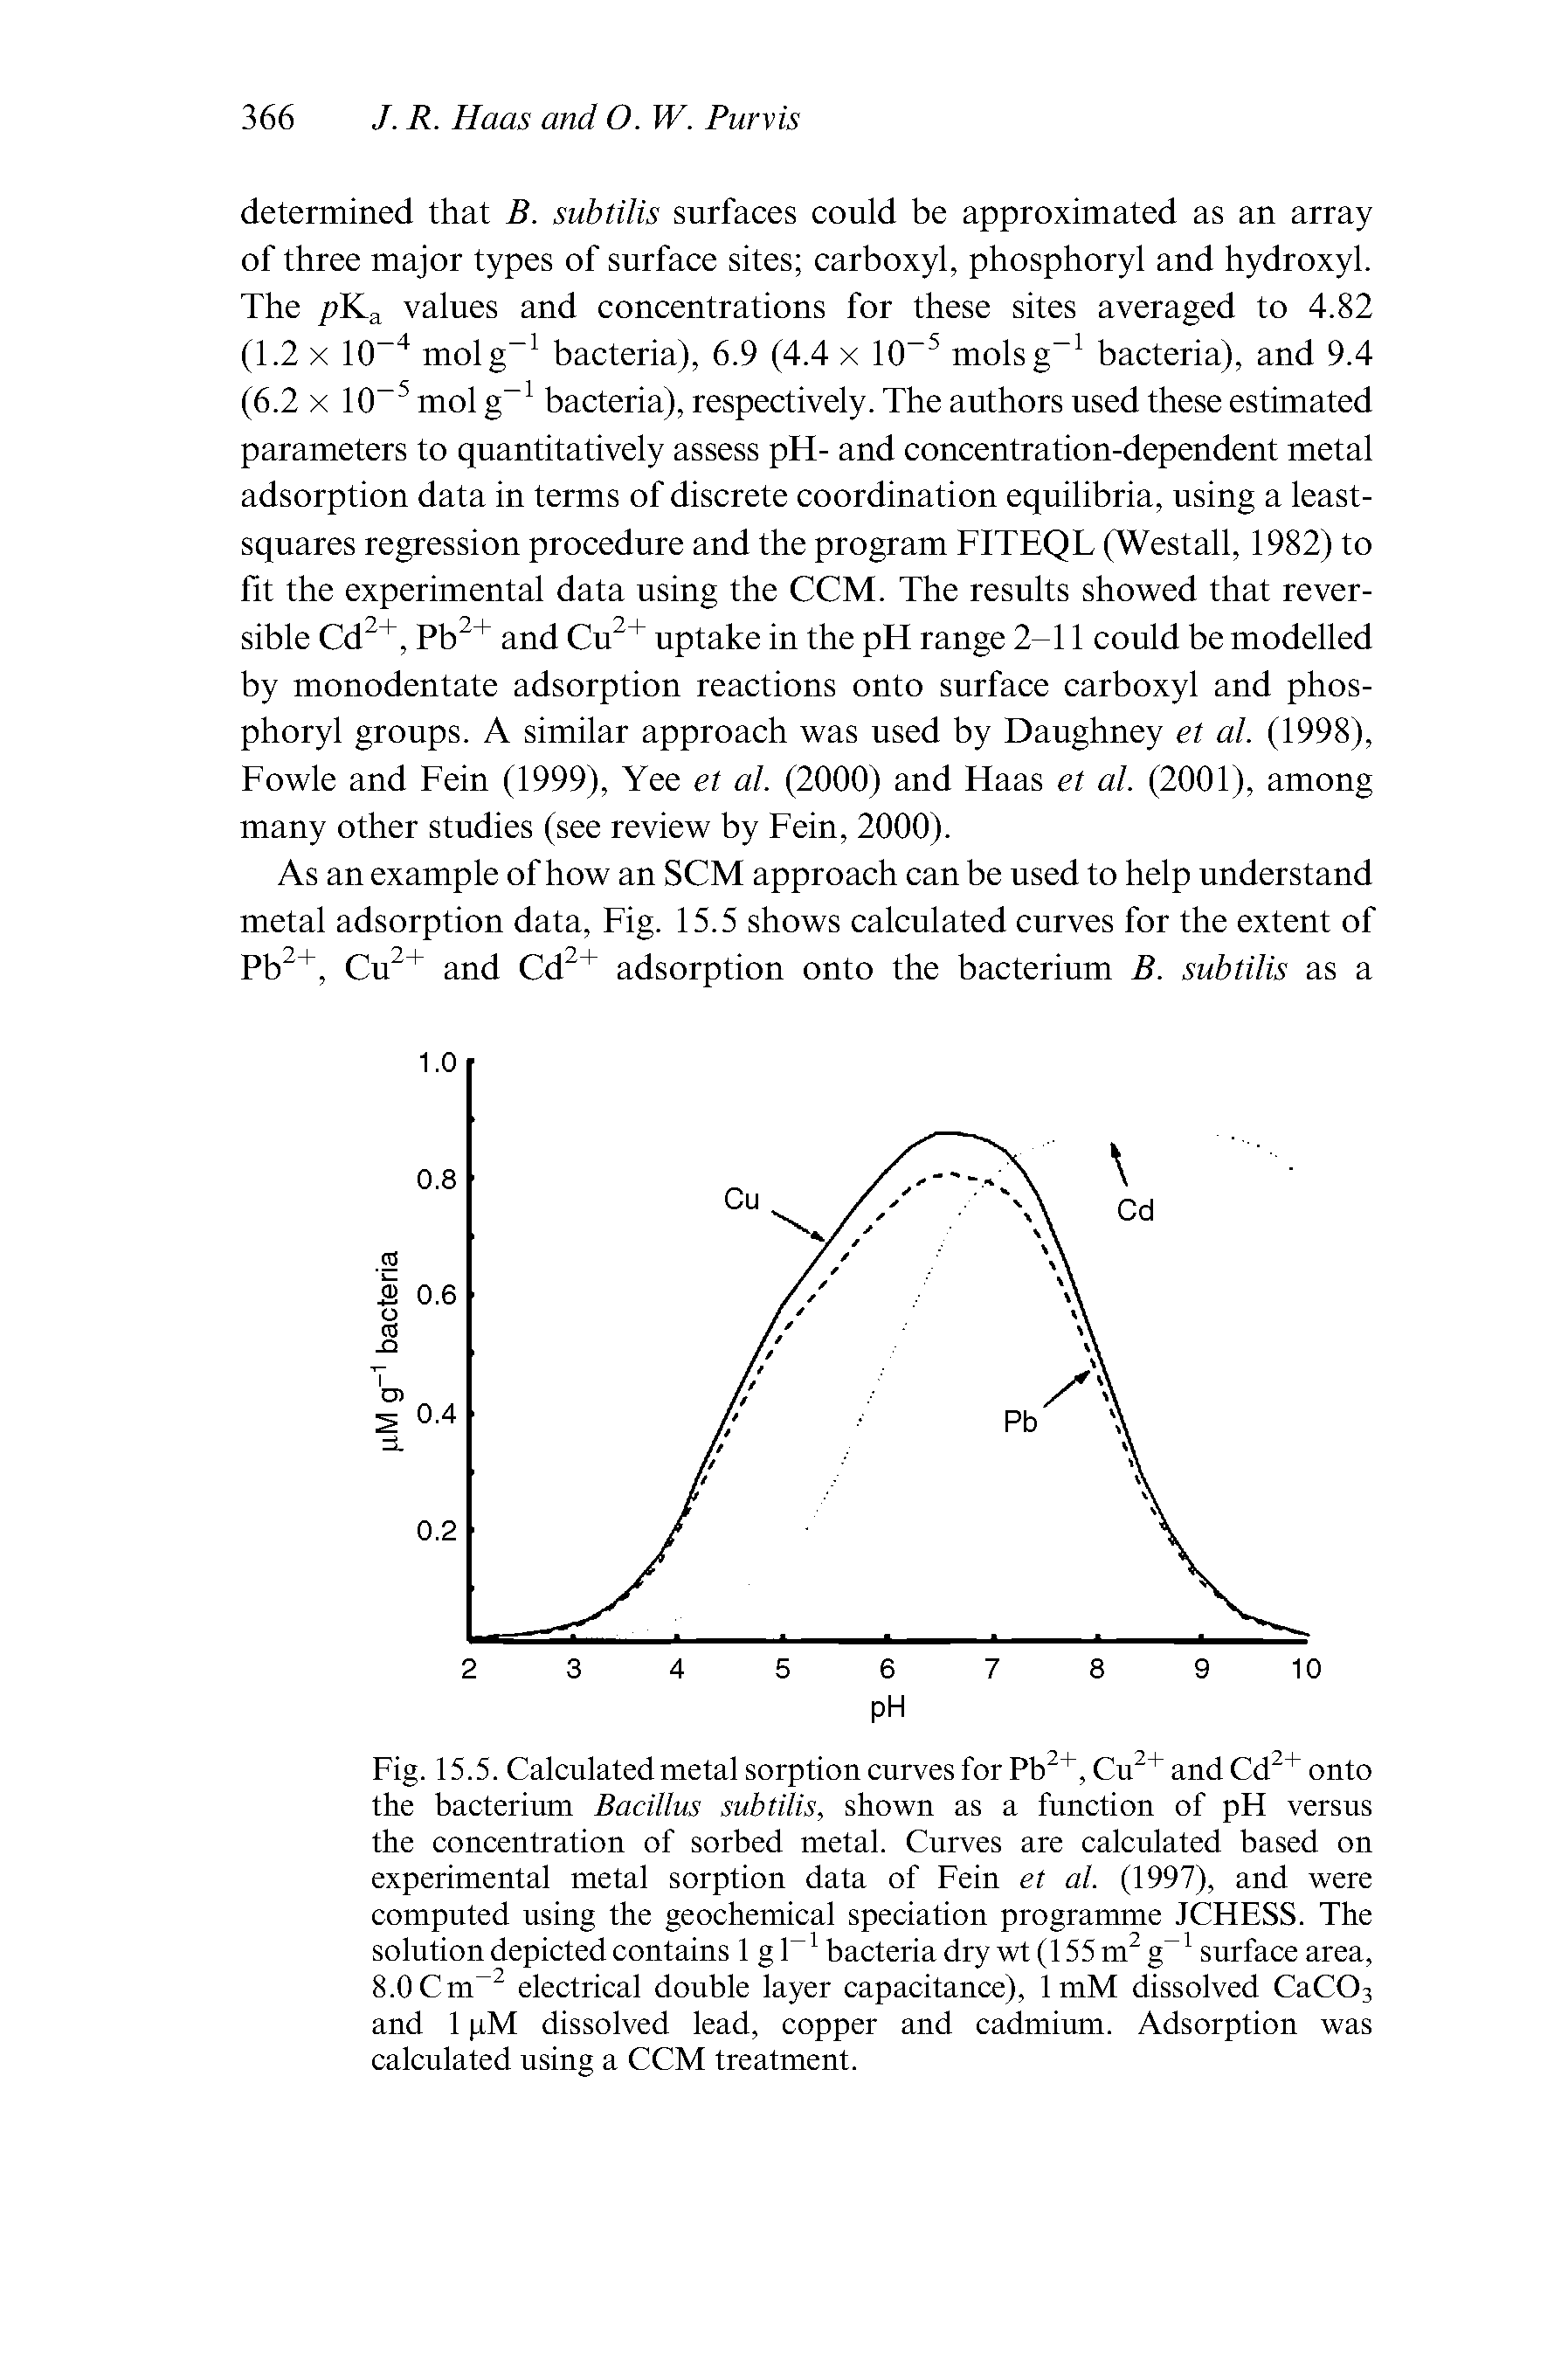 Fig. 15.5. Calculated metal sorption curves for Pb, Cu and Cd onto the bacterium Bacillus subtilis, shown as a function of pH versus the concentration of sorbed metal. Curves are calculated based on experimental metal sorption data of Fein et al. (1997), and were computed using the geochemical speciation programme JCHESS. The solution depicted contains 1 g 1 bacteria dry wt (155 m g surface area, 8.0 Cm electrical double layer capacitance), 1 mM dissolved CaC03 and 1 iM dissolved lead, copper and cadmium. Adsorption was calculated using a CCM treatment.